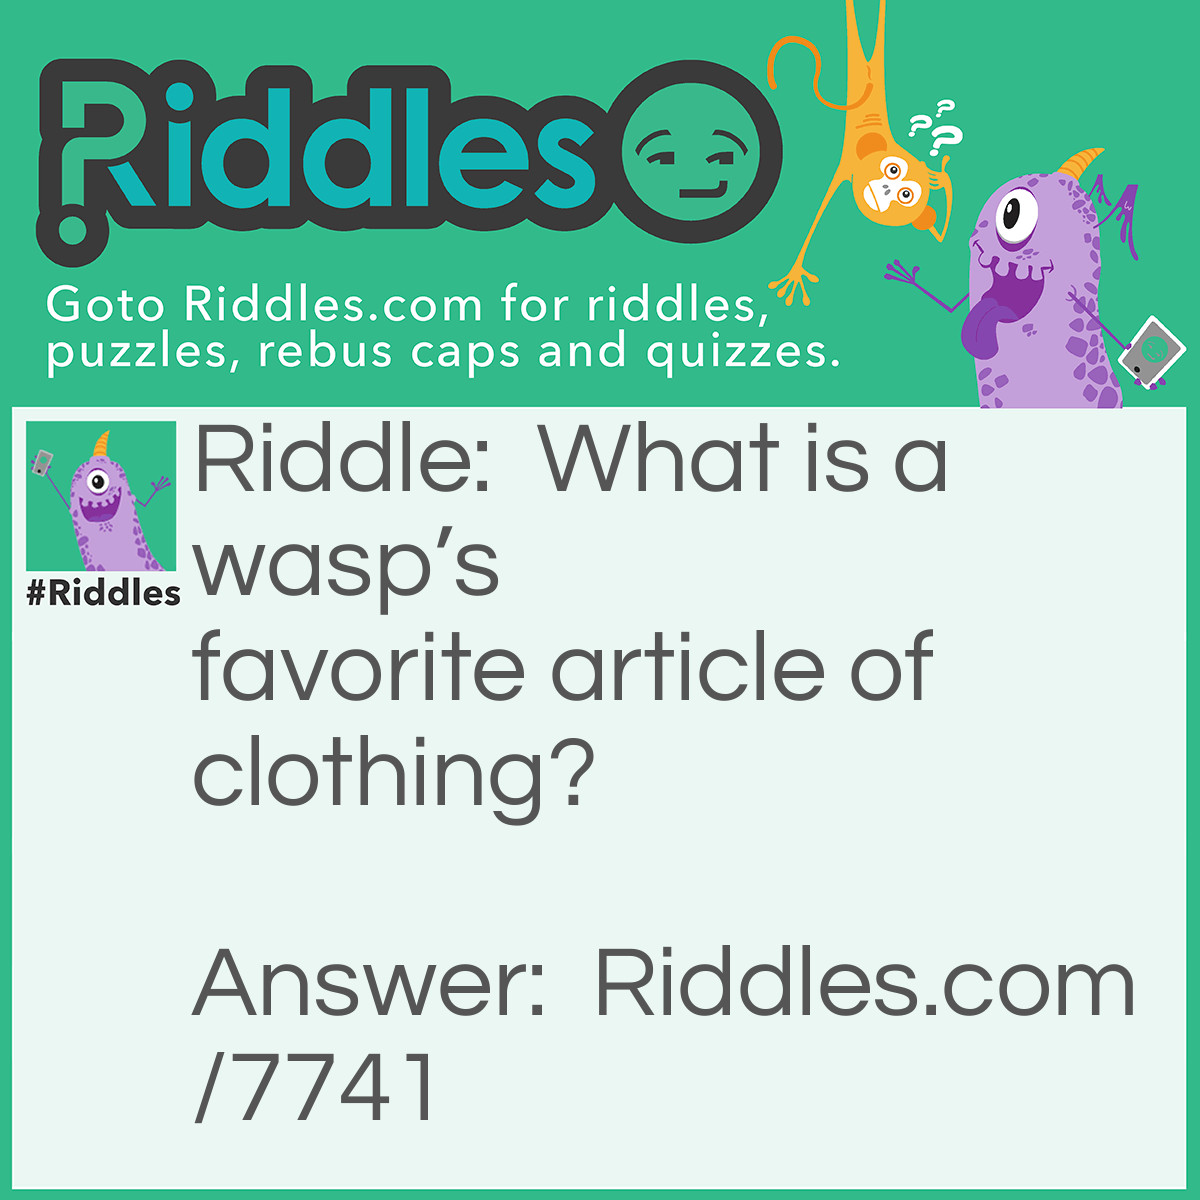 Riddle: What is a wasp's favorite article of clothing? Answer: A Yellowjacket!